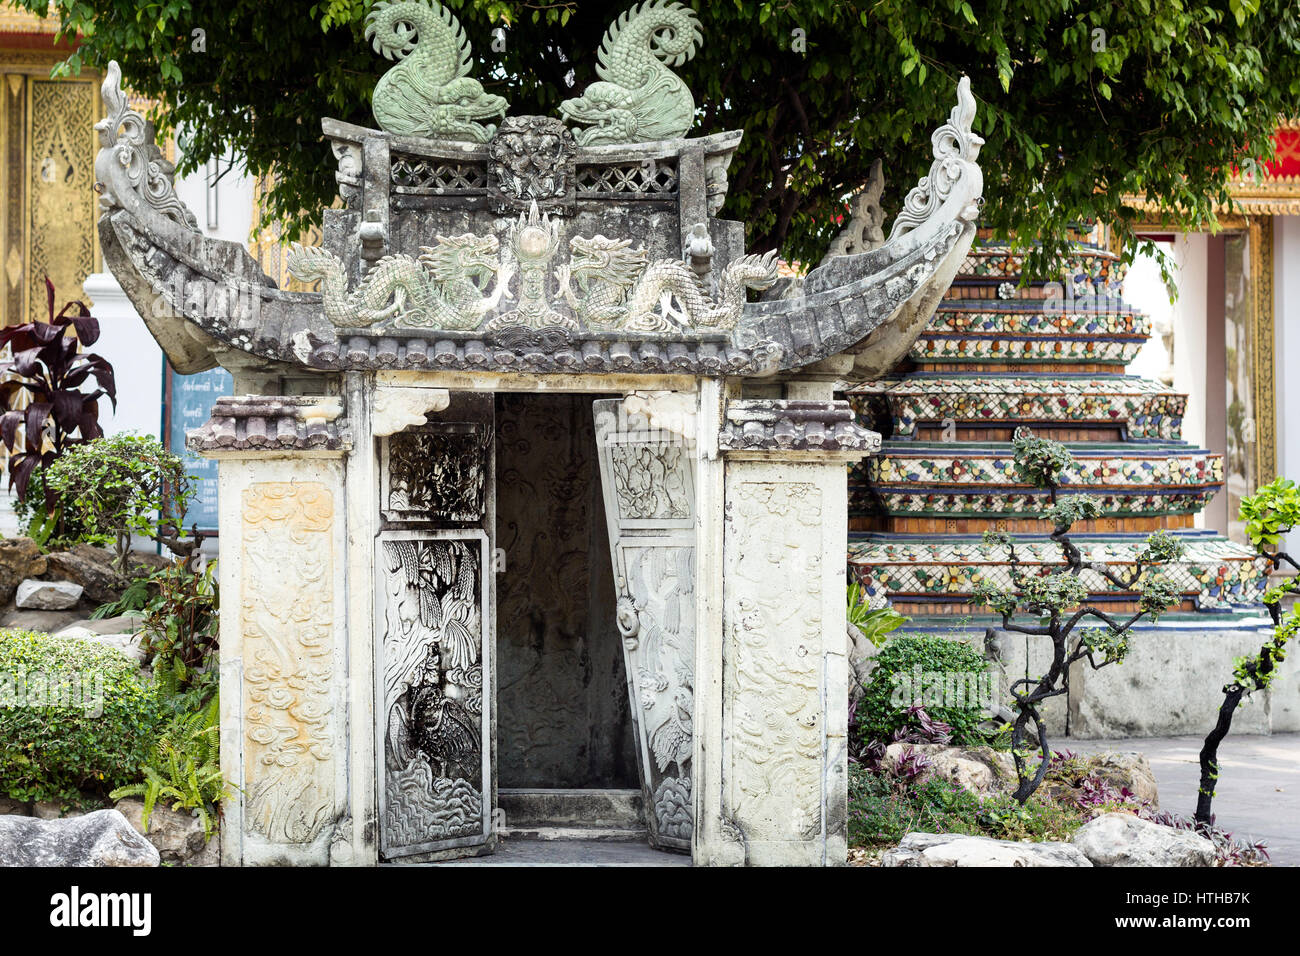 A view of a small building in the courtyard of the temple of Wat Pho in Bangkok, Tahiland. Stock Photo